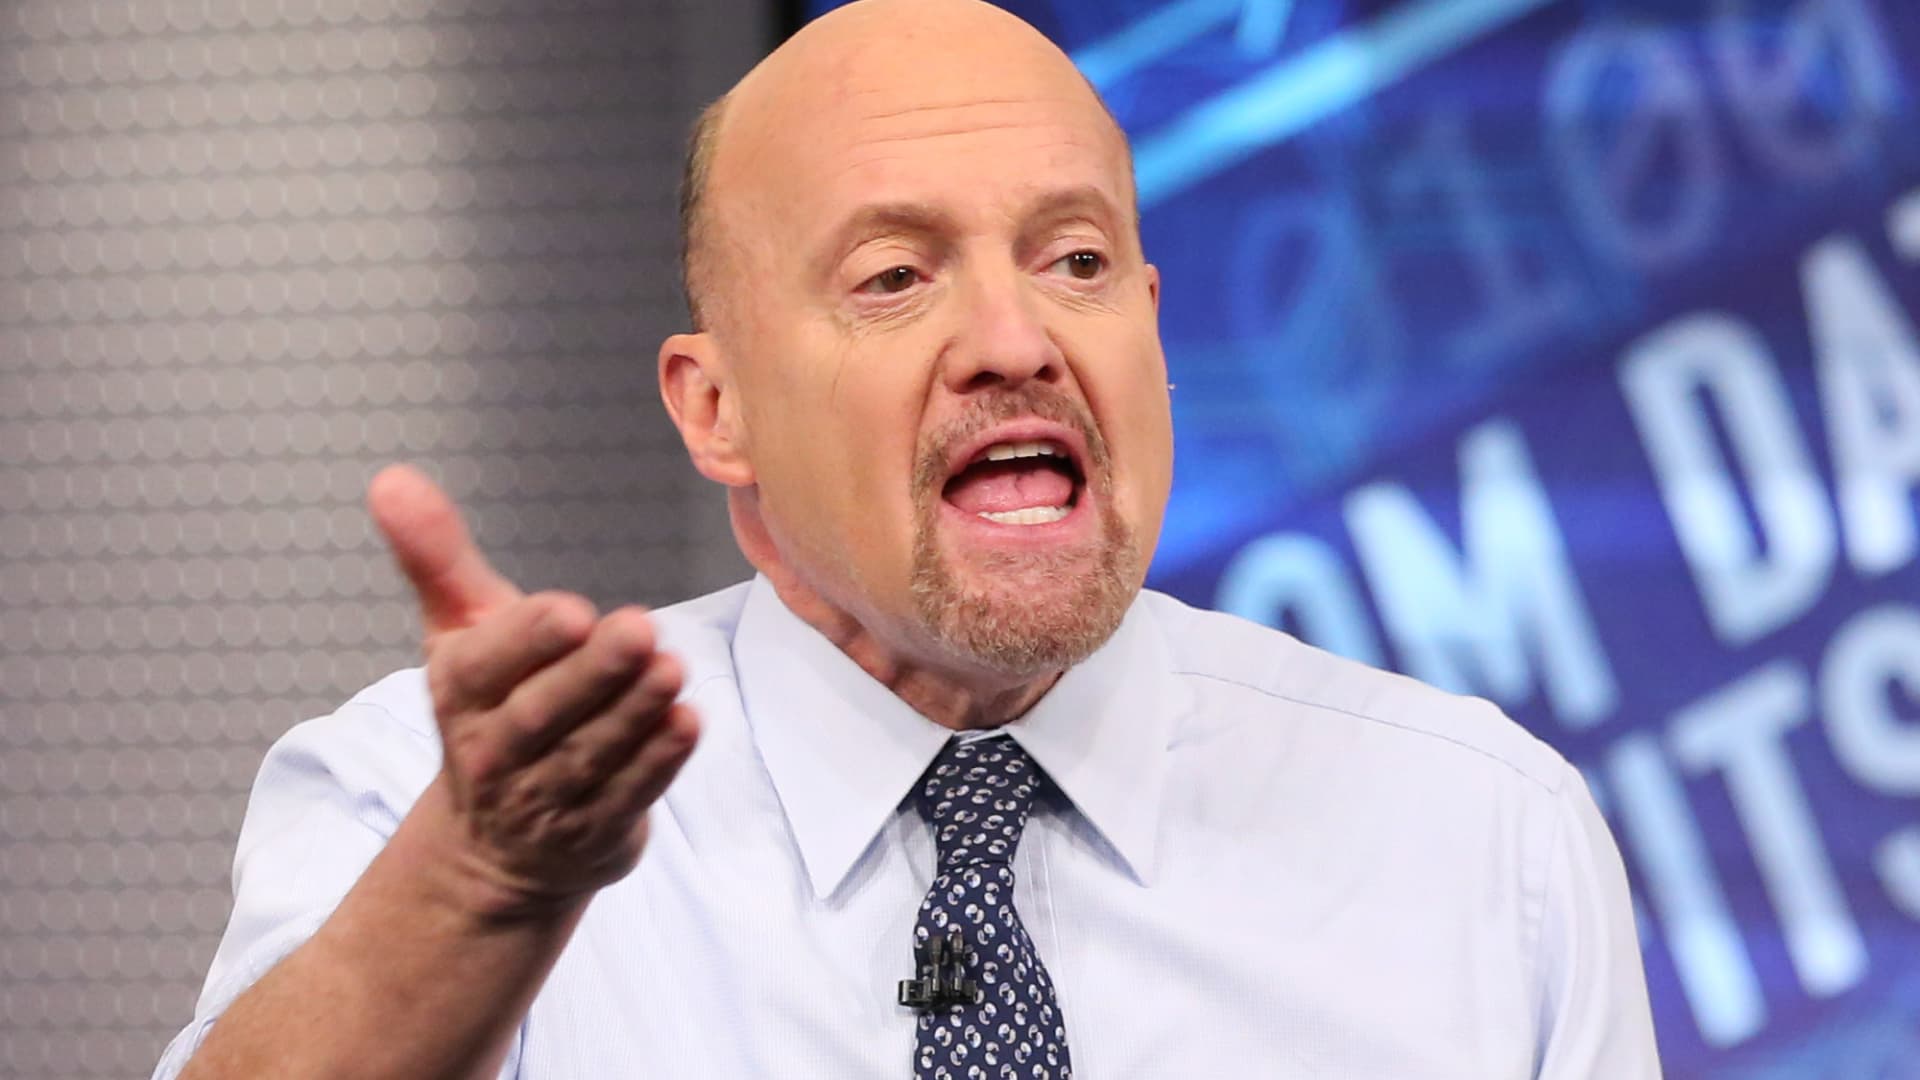 Jim Cramer says we're in a bull market, so buy on the dip